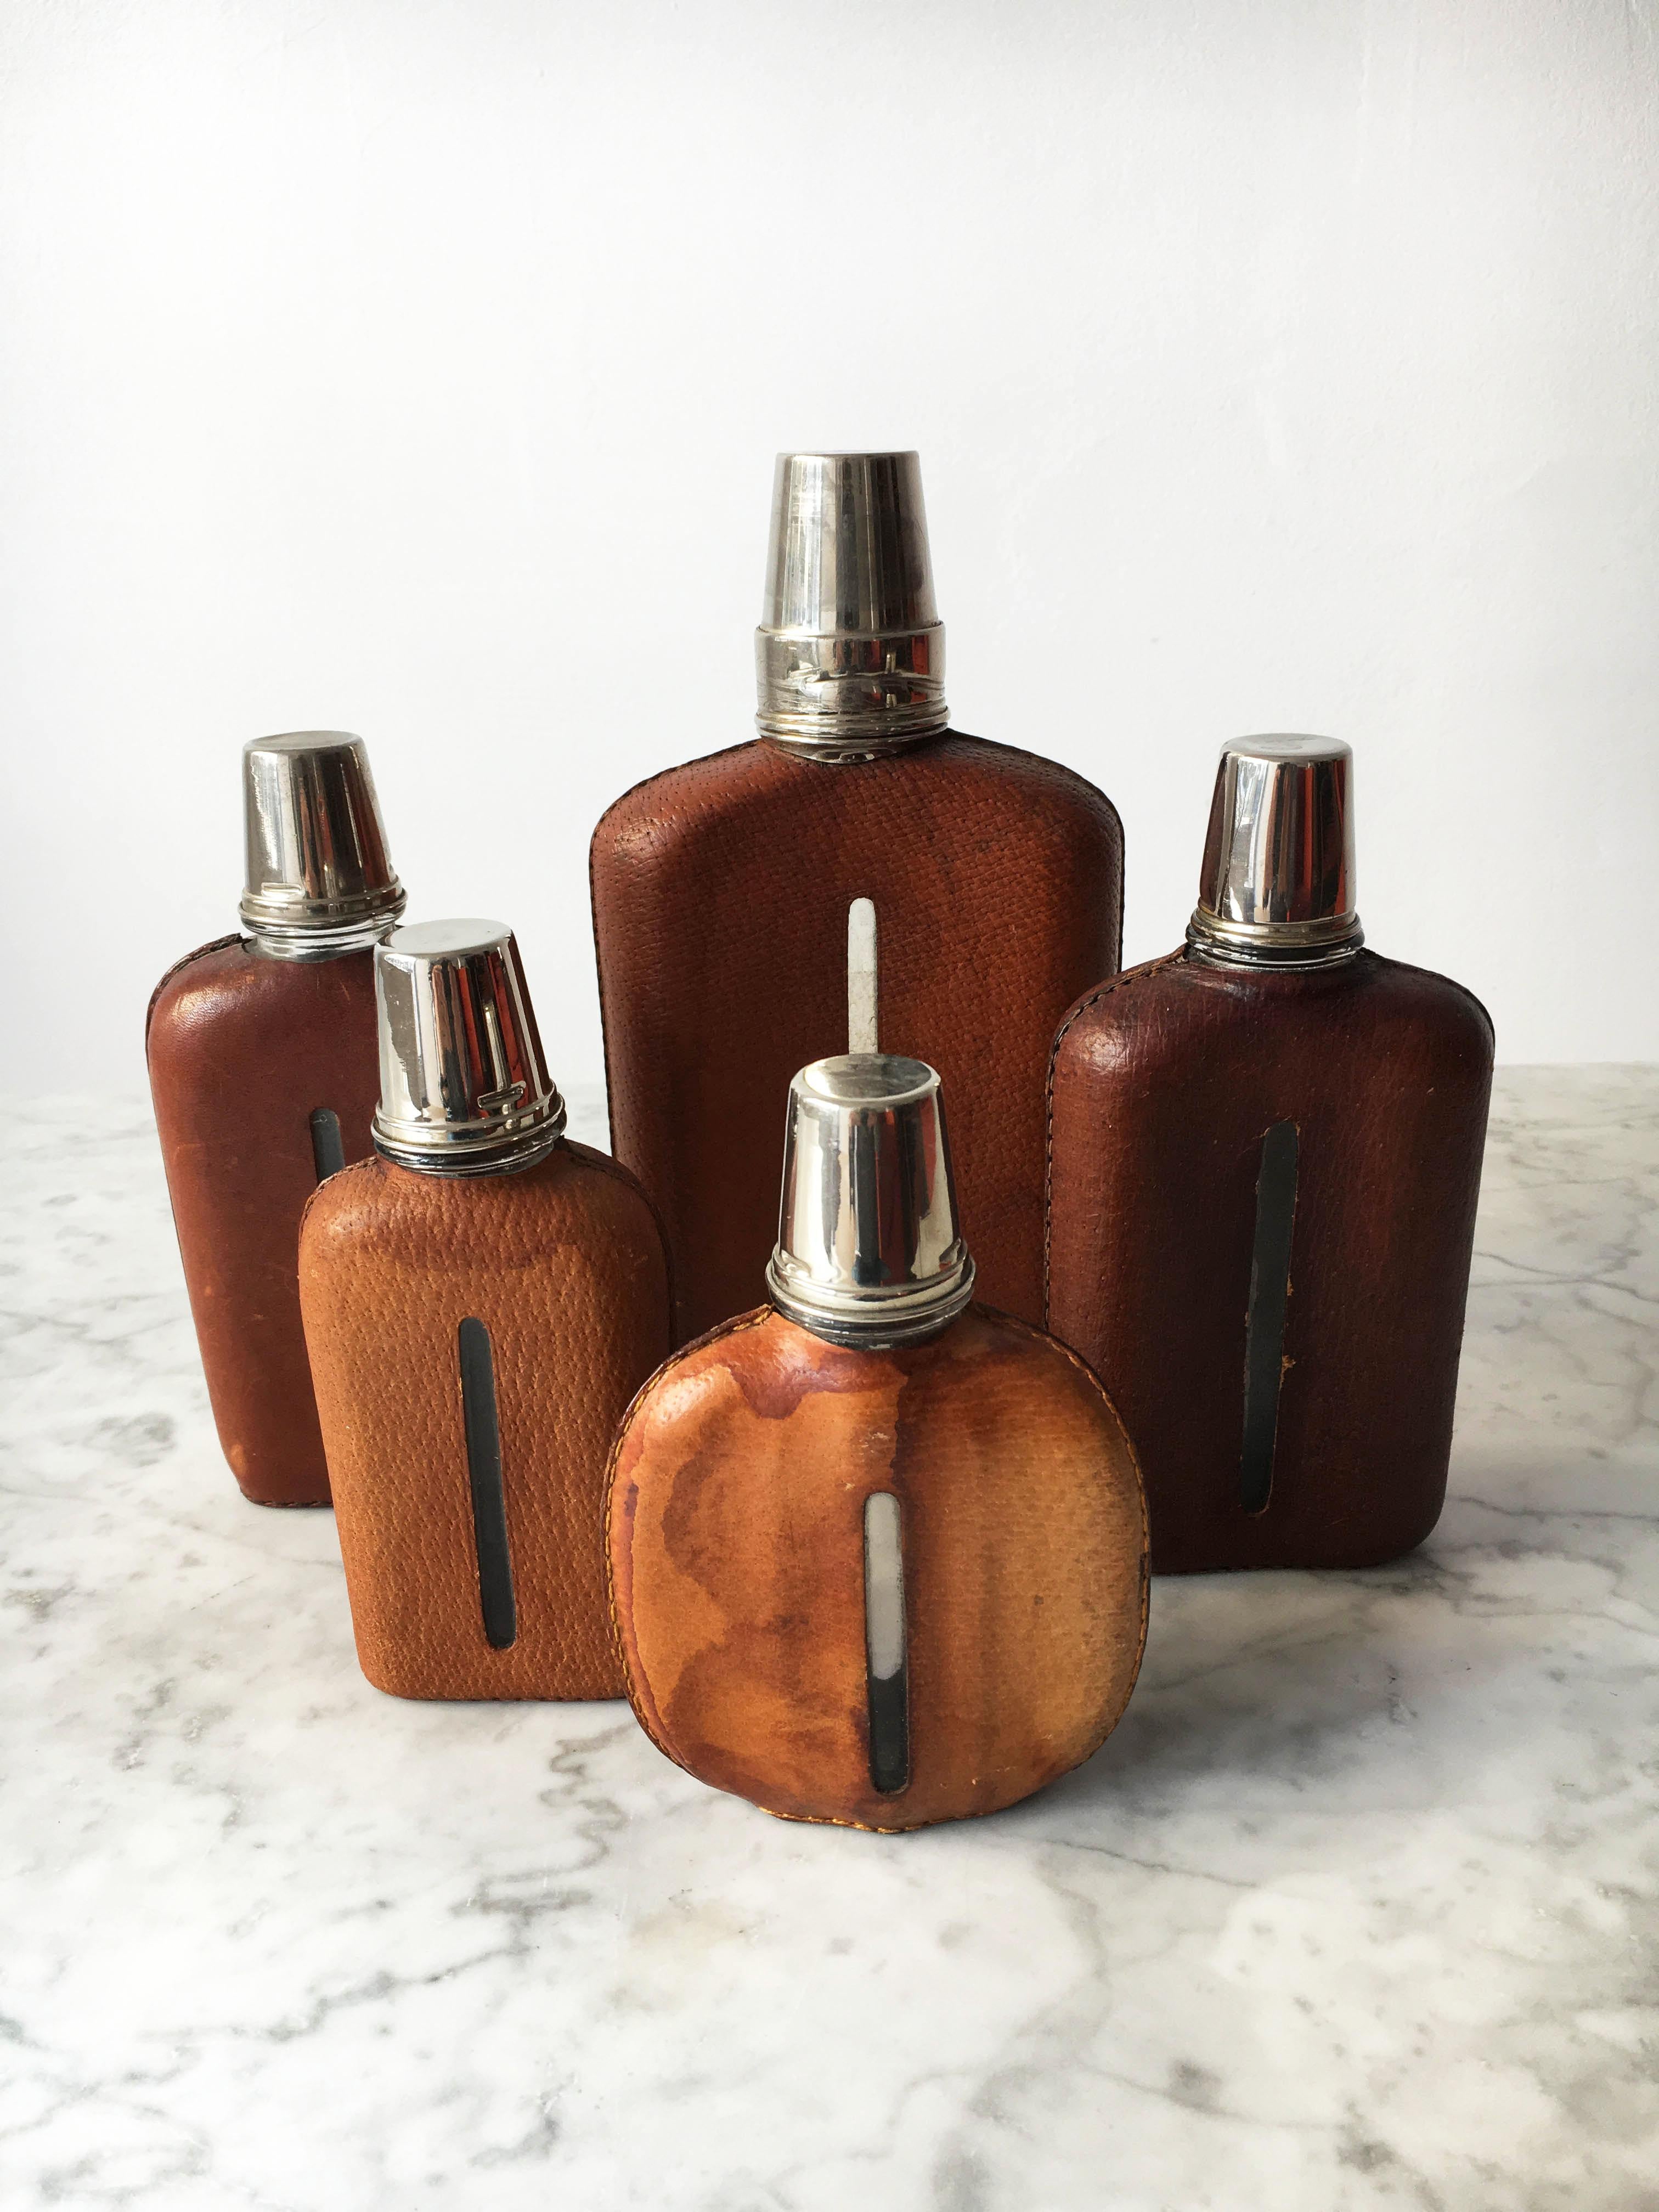 A very rare set of five modernist flasks designed and made in the Werkstätte Carl Auböck. The minimalist sculptural shape is covered in leather, variations in size, from small to extra large. In excellent condition with just the right amount of